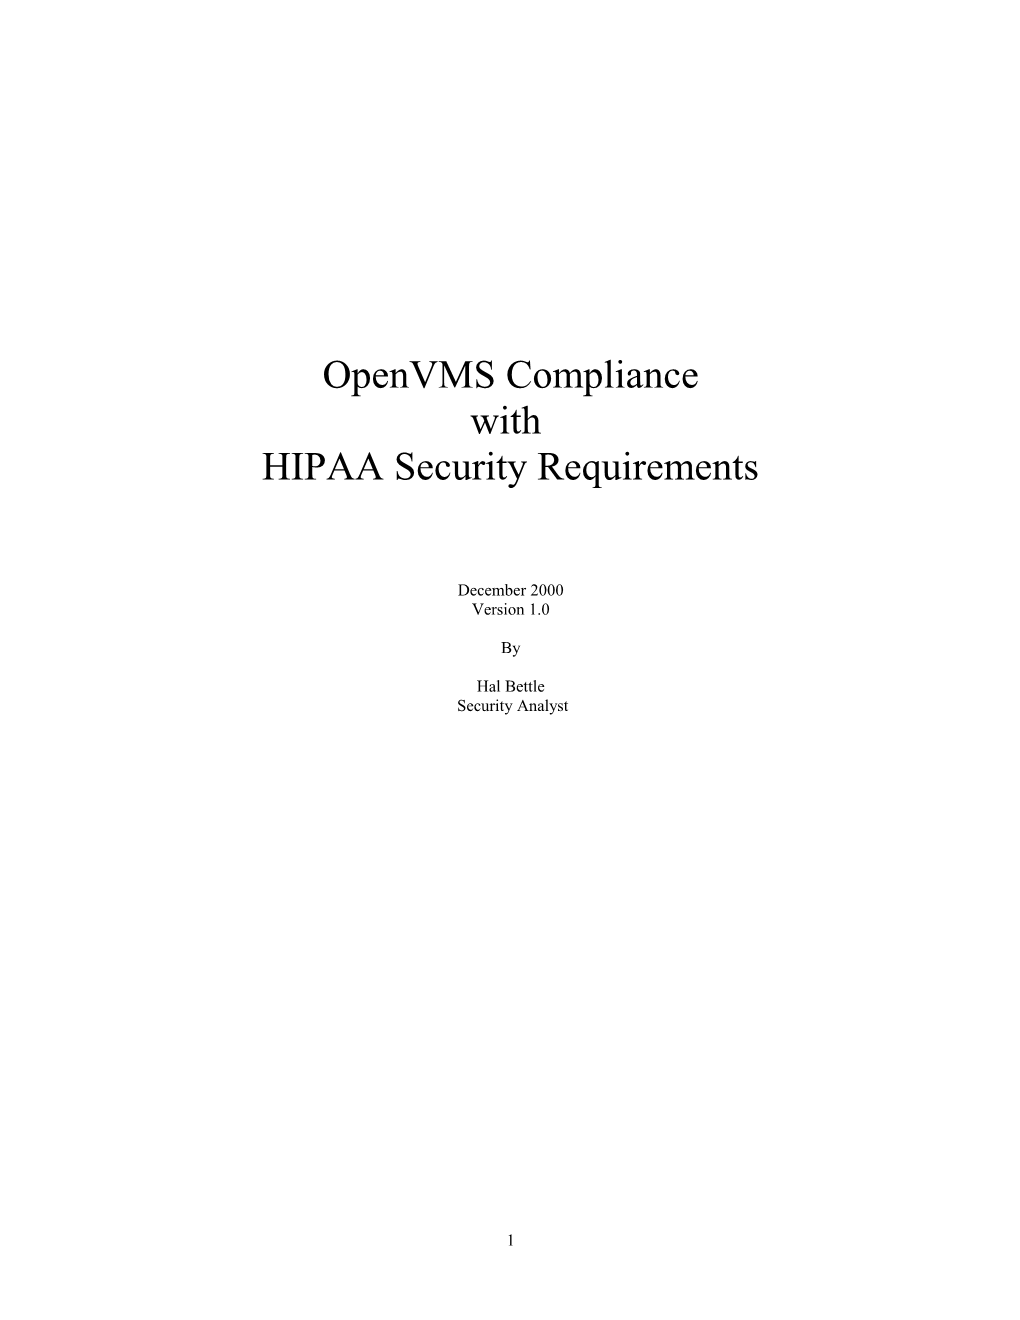 Openvms Compliance with HIPAA Security Requirements